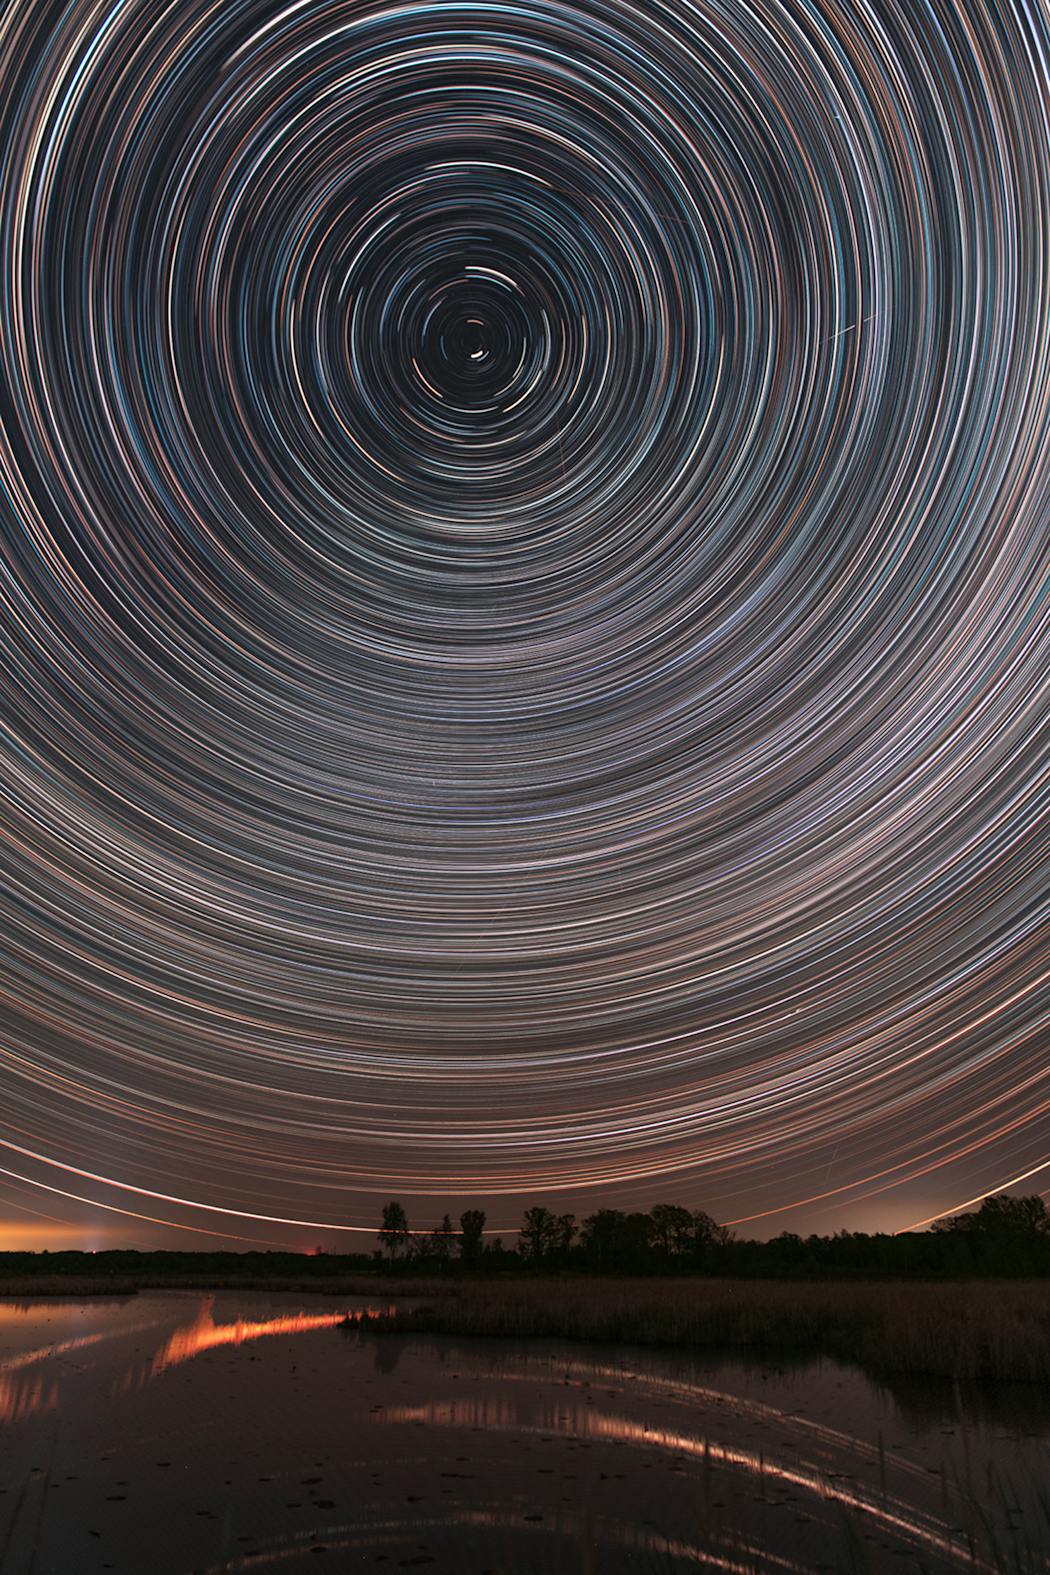 A star trails image from Carlos Avery Wildlife Management Area.